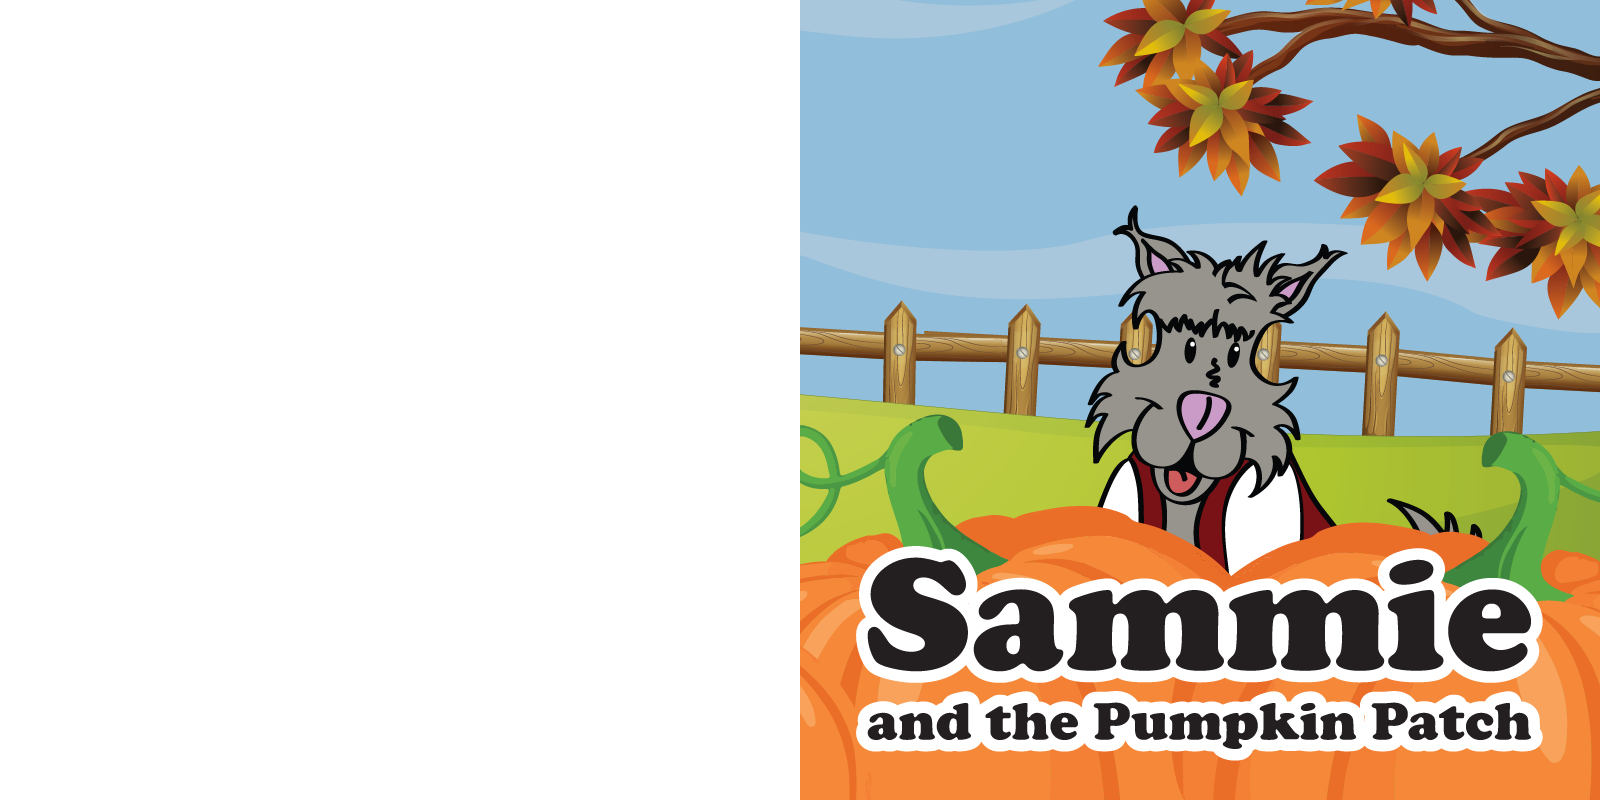 Slide 1 of the Sammie and the Pumpkin Patch E-book